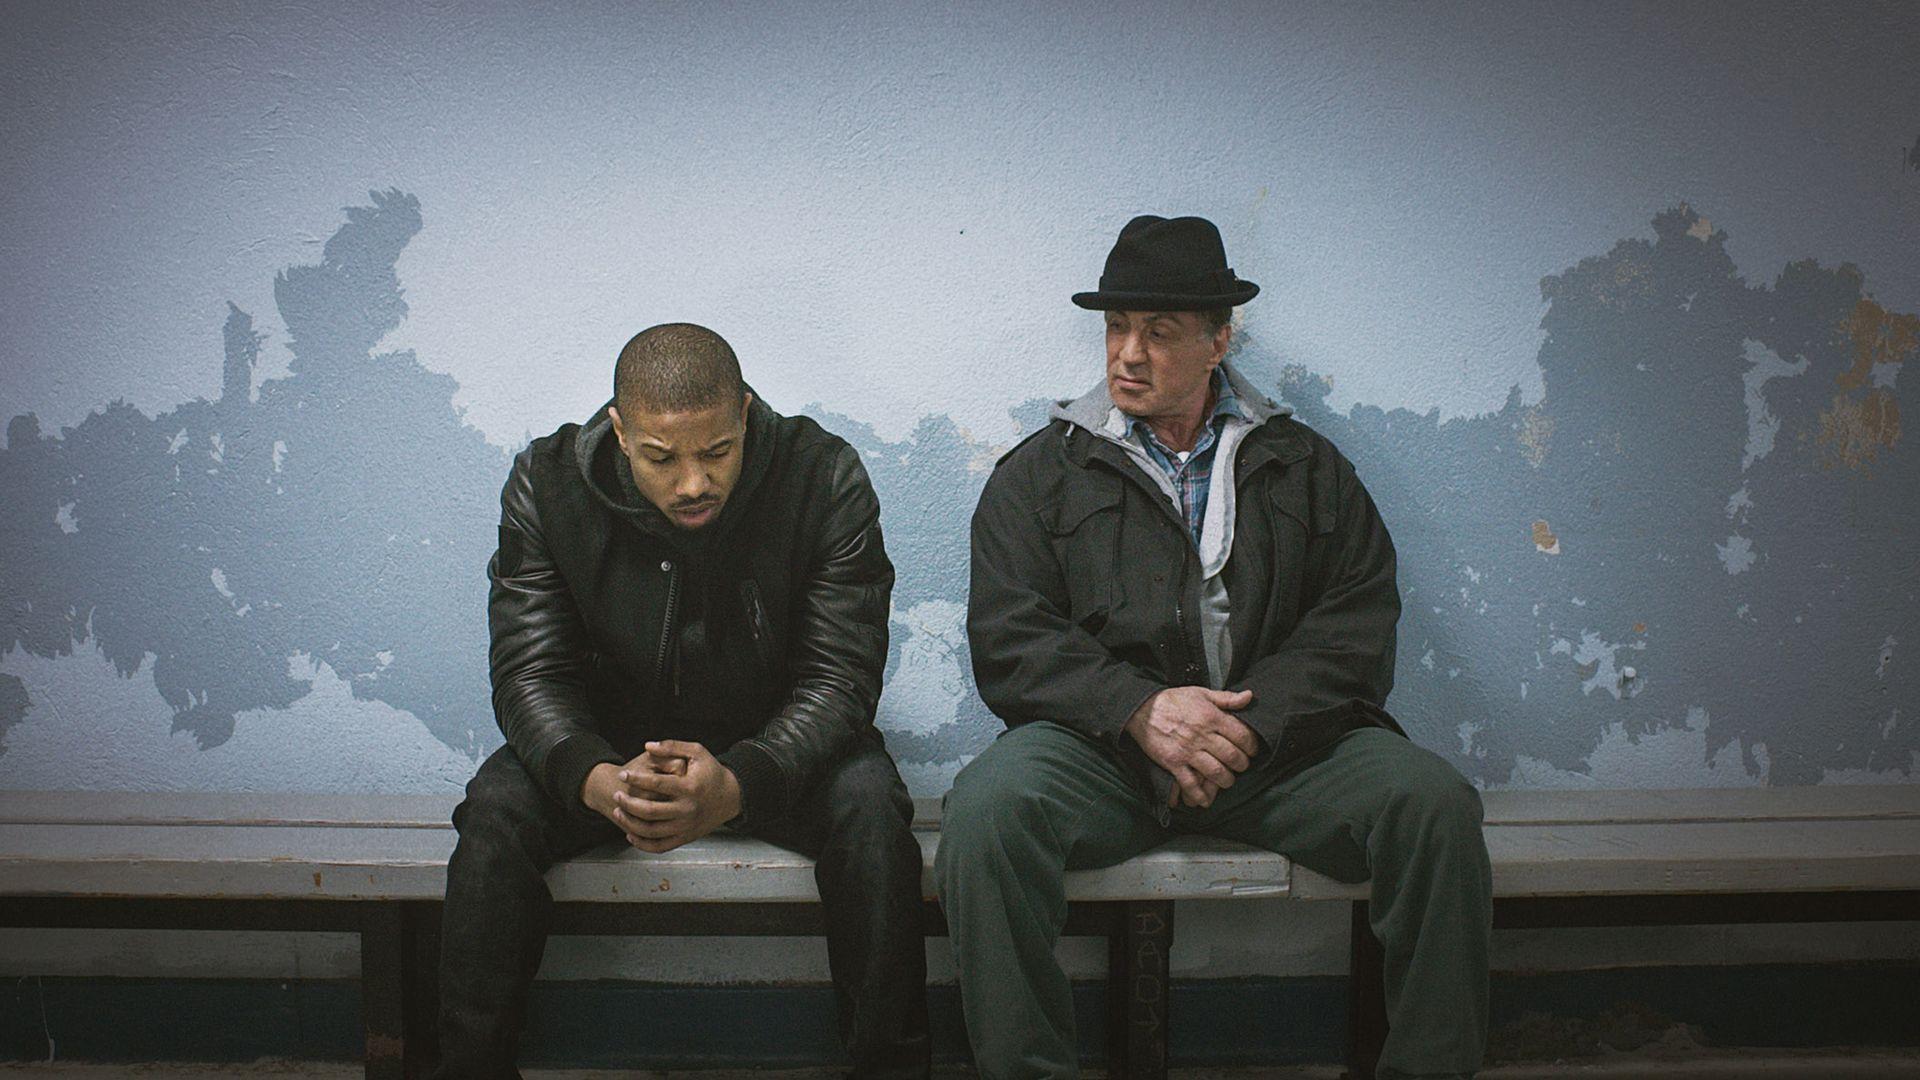 Sylvester Stallone Drops New Photo Teasing CREED 2 and Hints at 2018